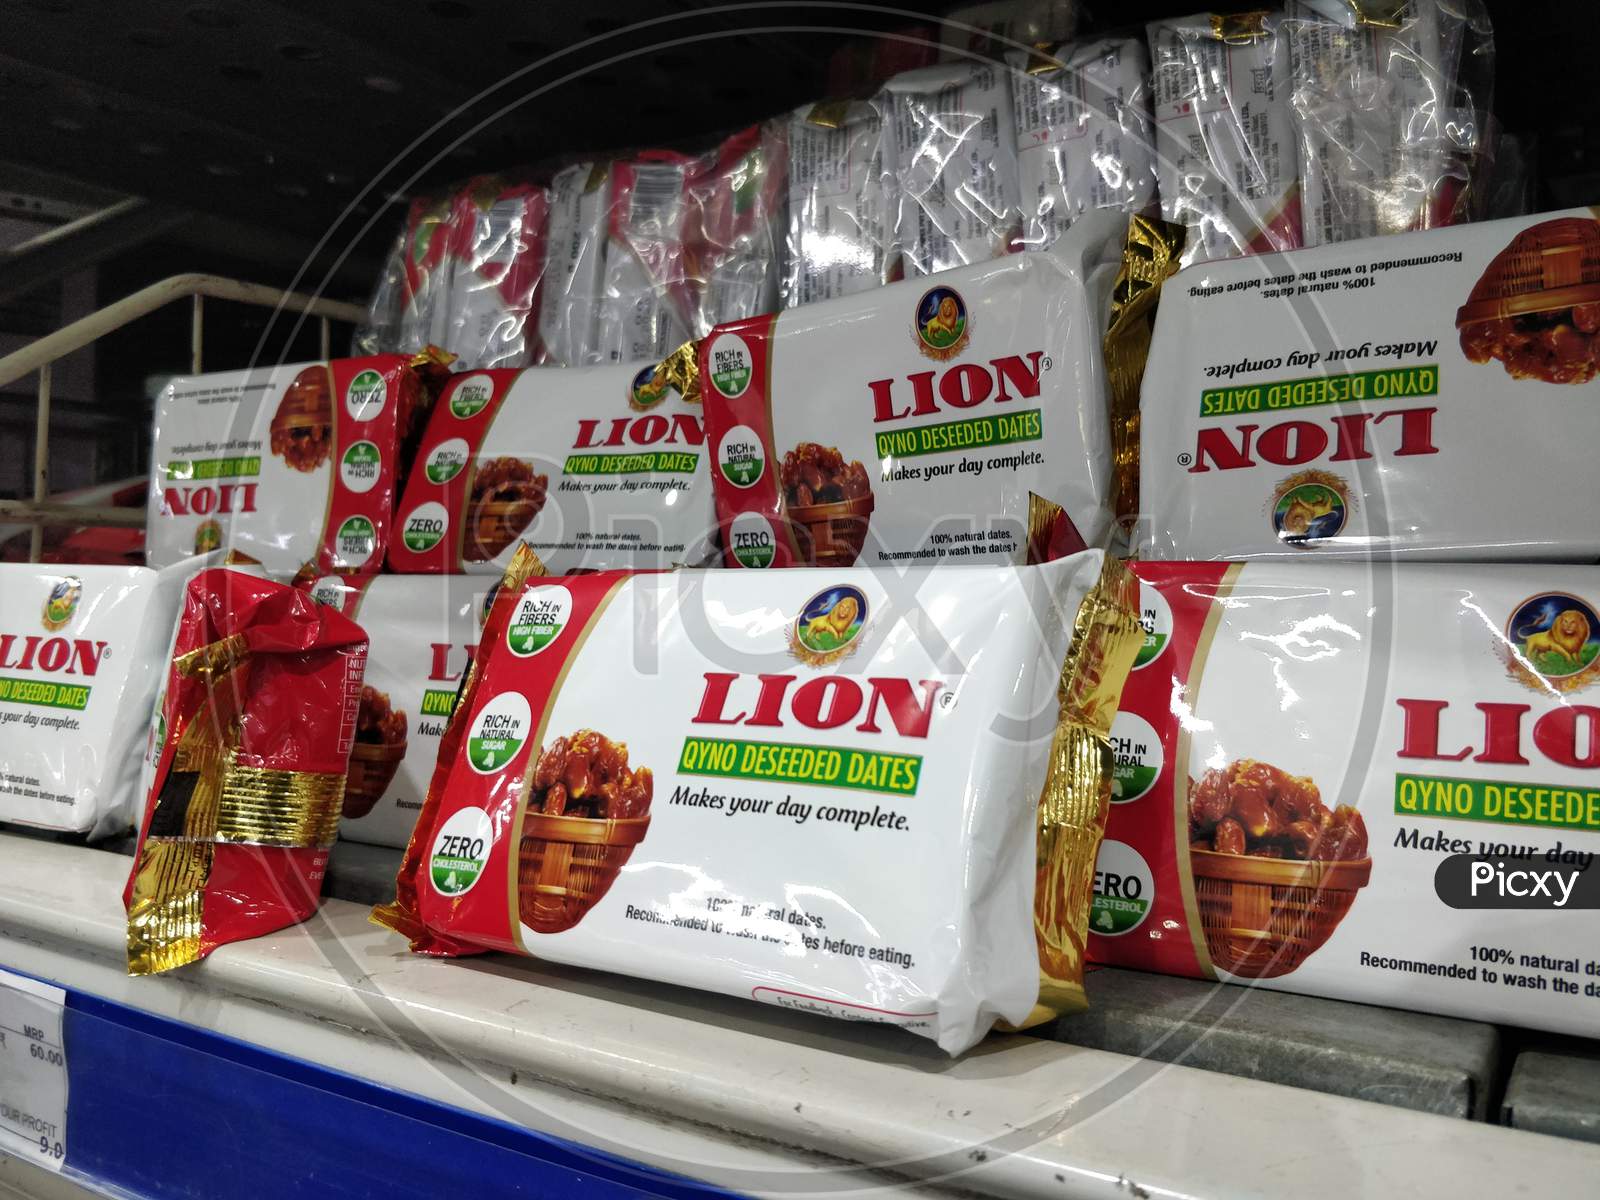 Lion dates in an Aisle